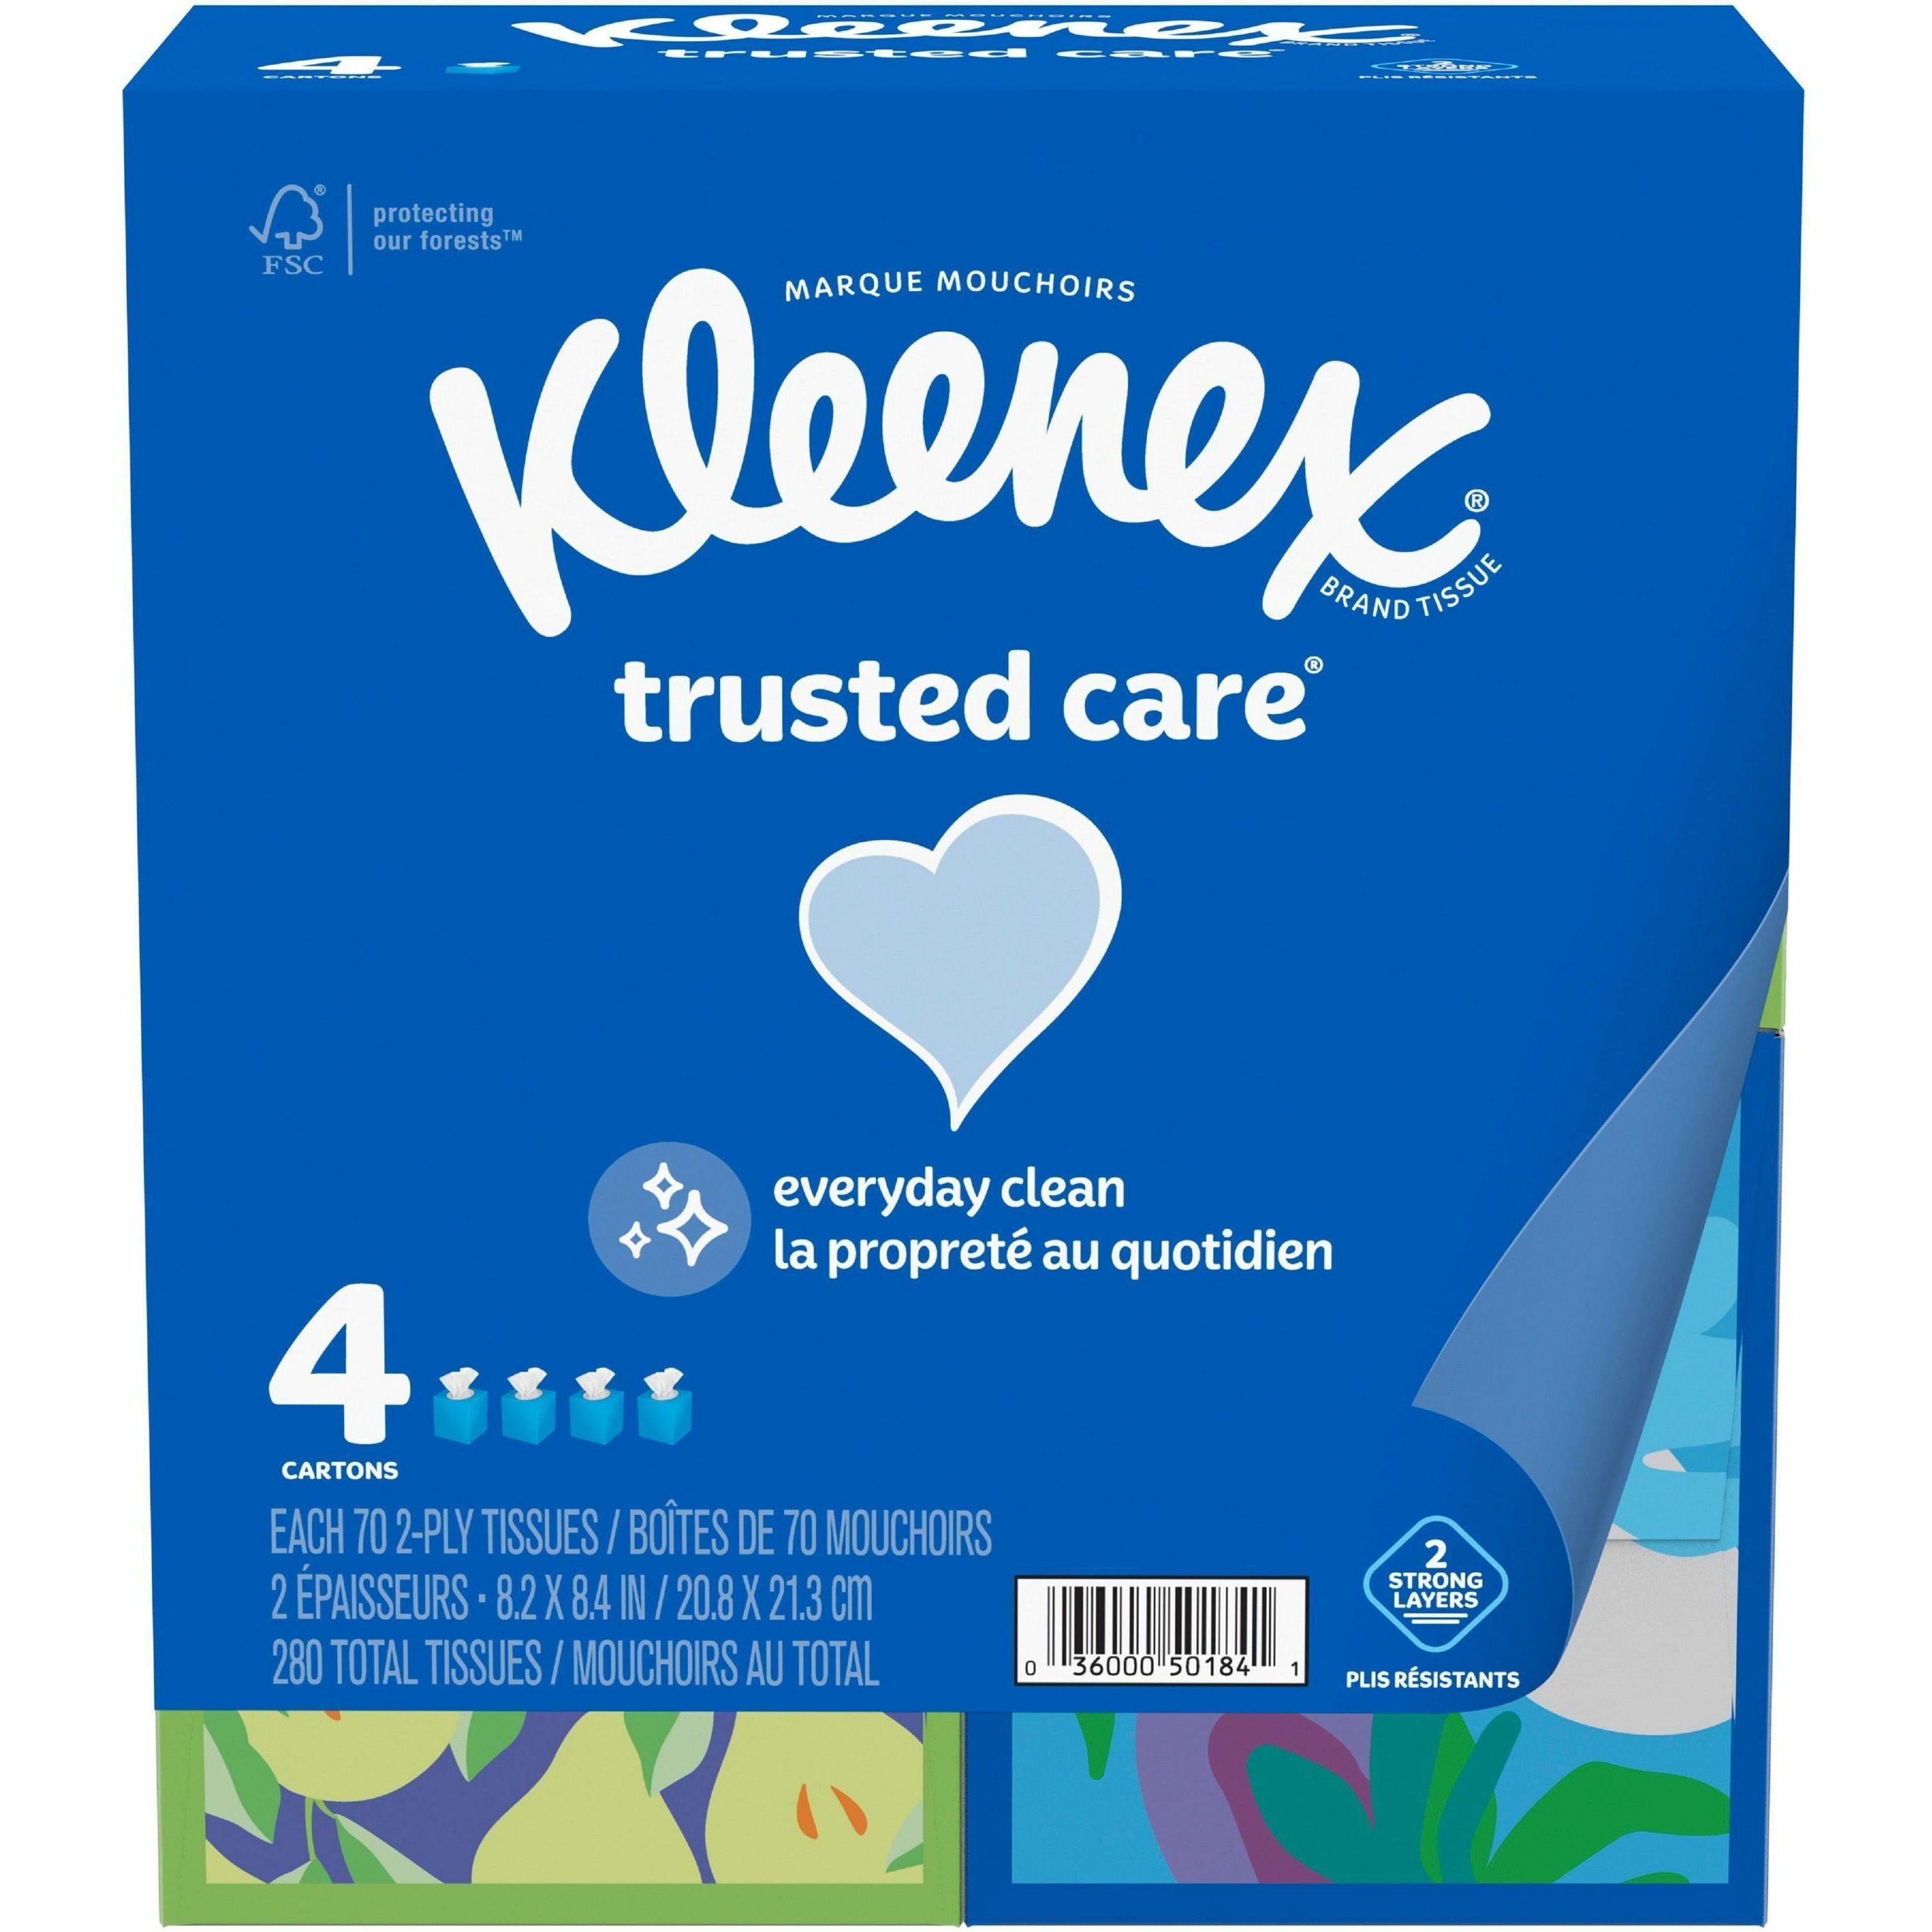 kleenex-trusted-care-tissues-2-ply-820-x-840-white-soft-strong-absorbent-durable-for-home-office-school-70-per-box-4-pack_kcc50184 - 2